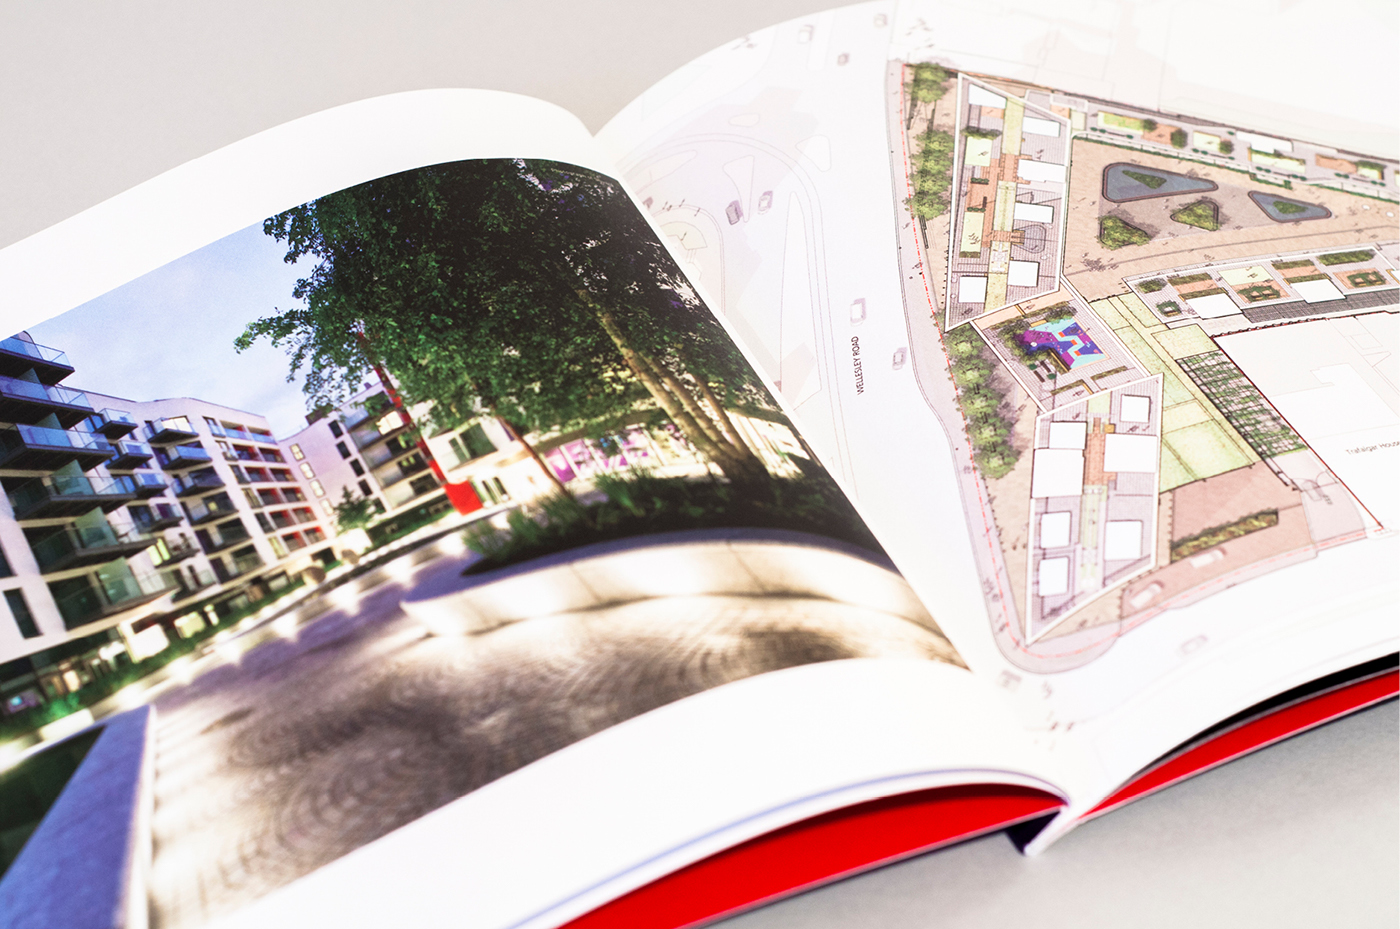 Interior planners brochure red infographic CGI building visualisation apartments design architect architects designers Booklet architectural